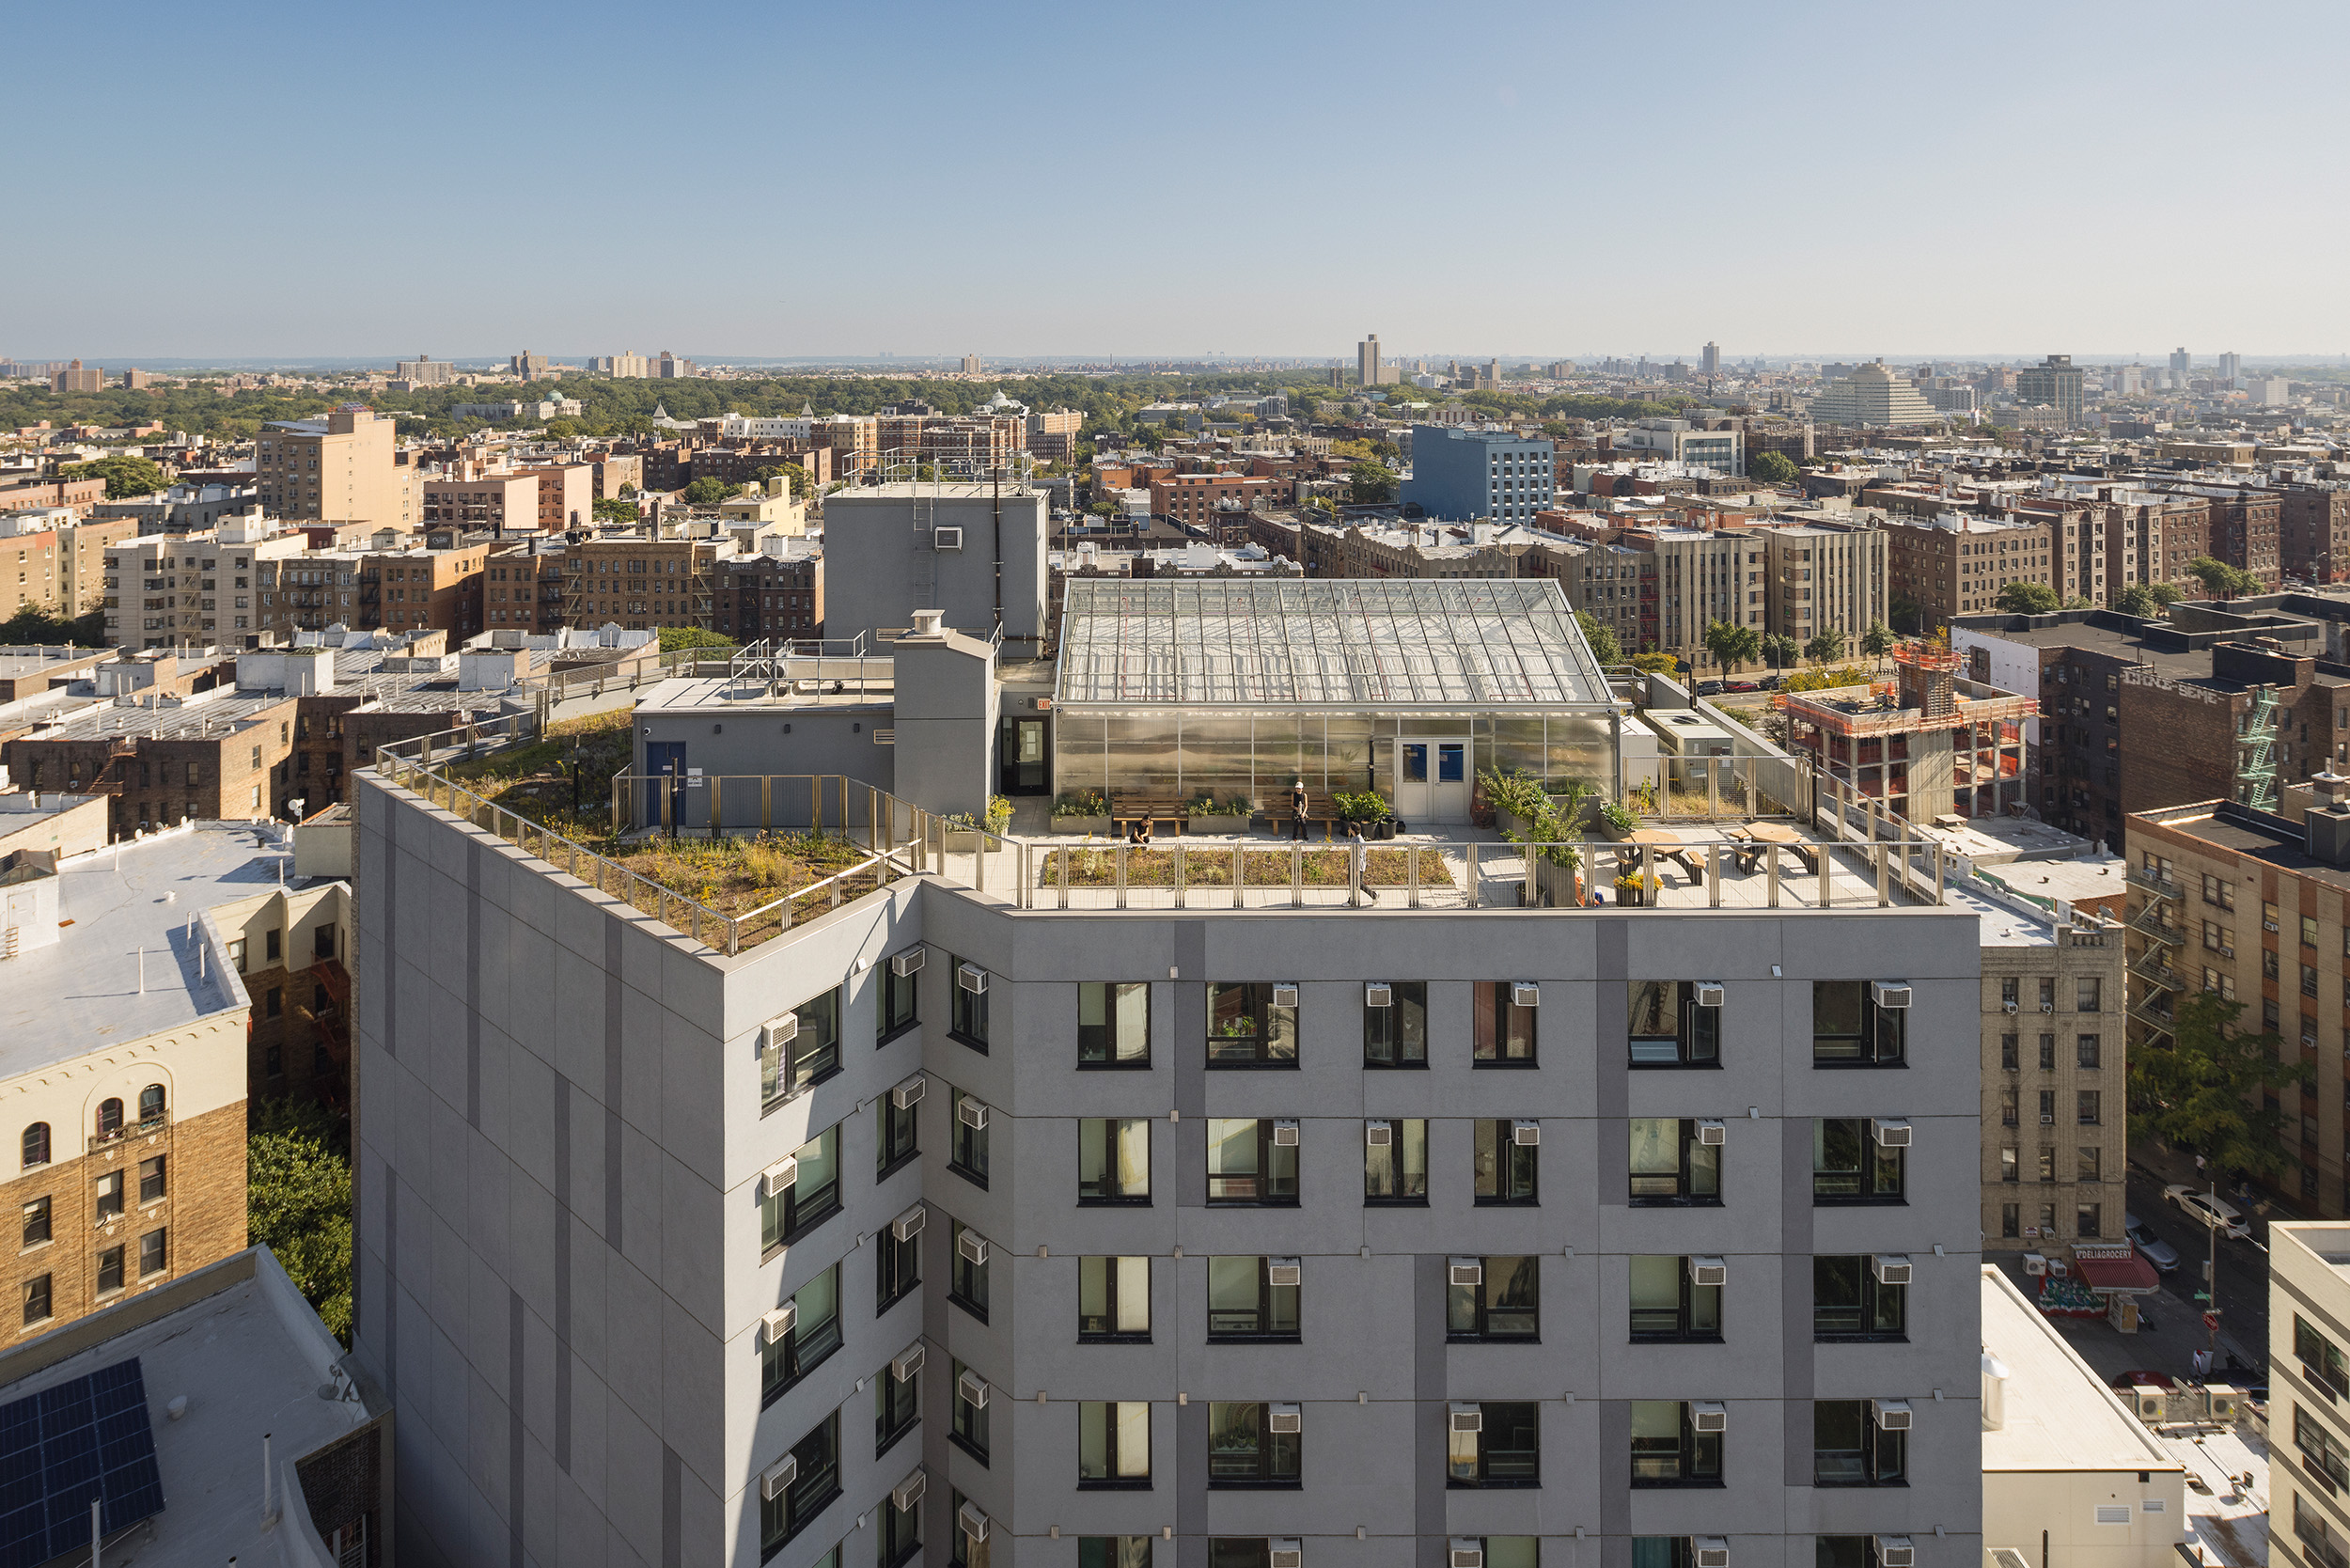 Bedford Green House I in the Bronx, NY, by ESKW/Architects; Billie Cohen, Ltd. Photo: Courtesy of ESKW/Architects / Michael Grimm Photography.